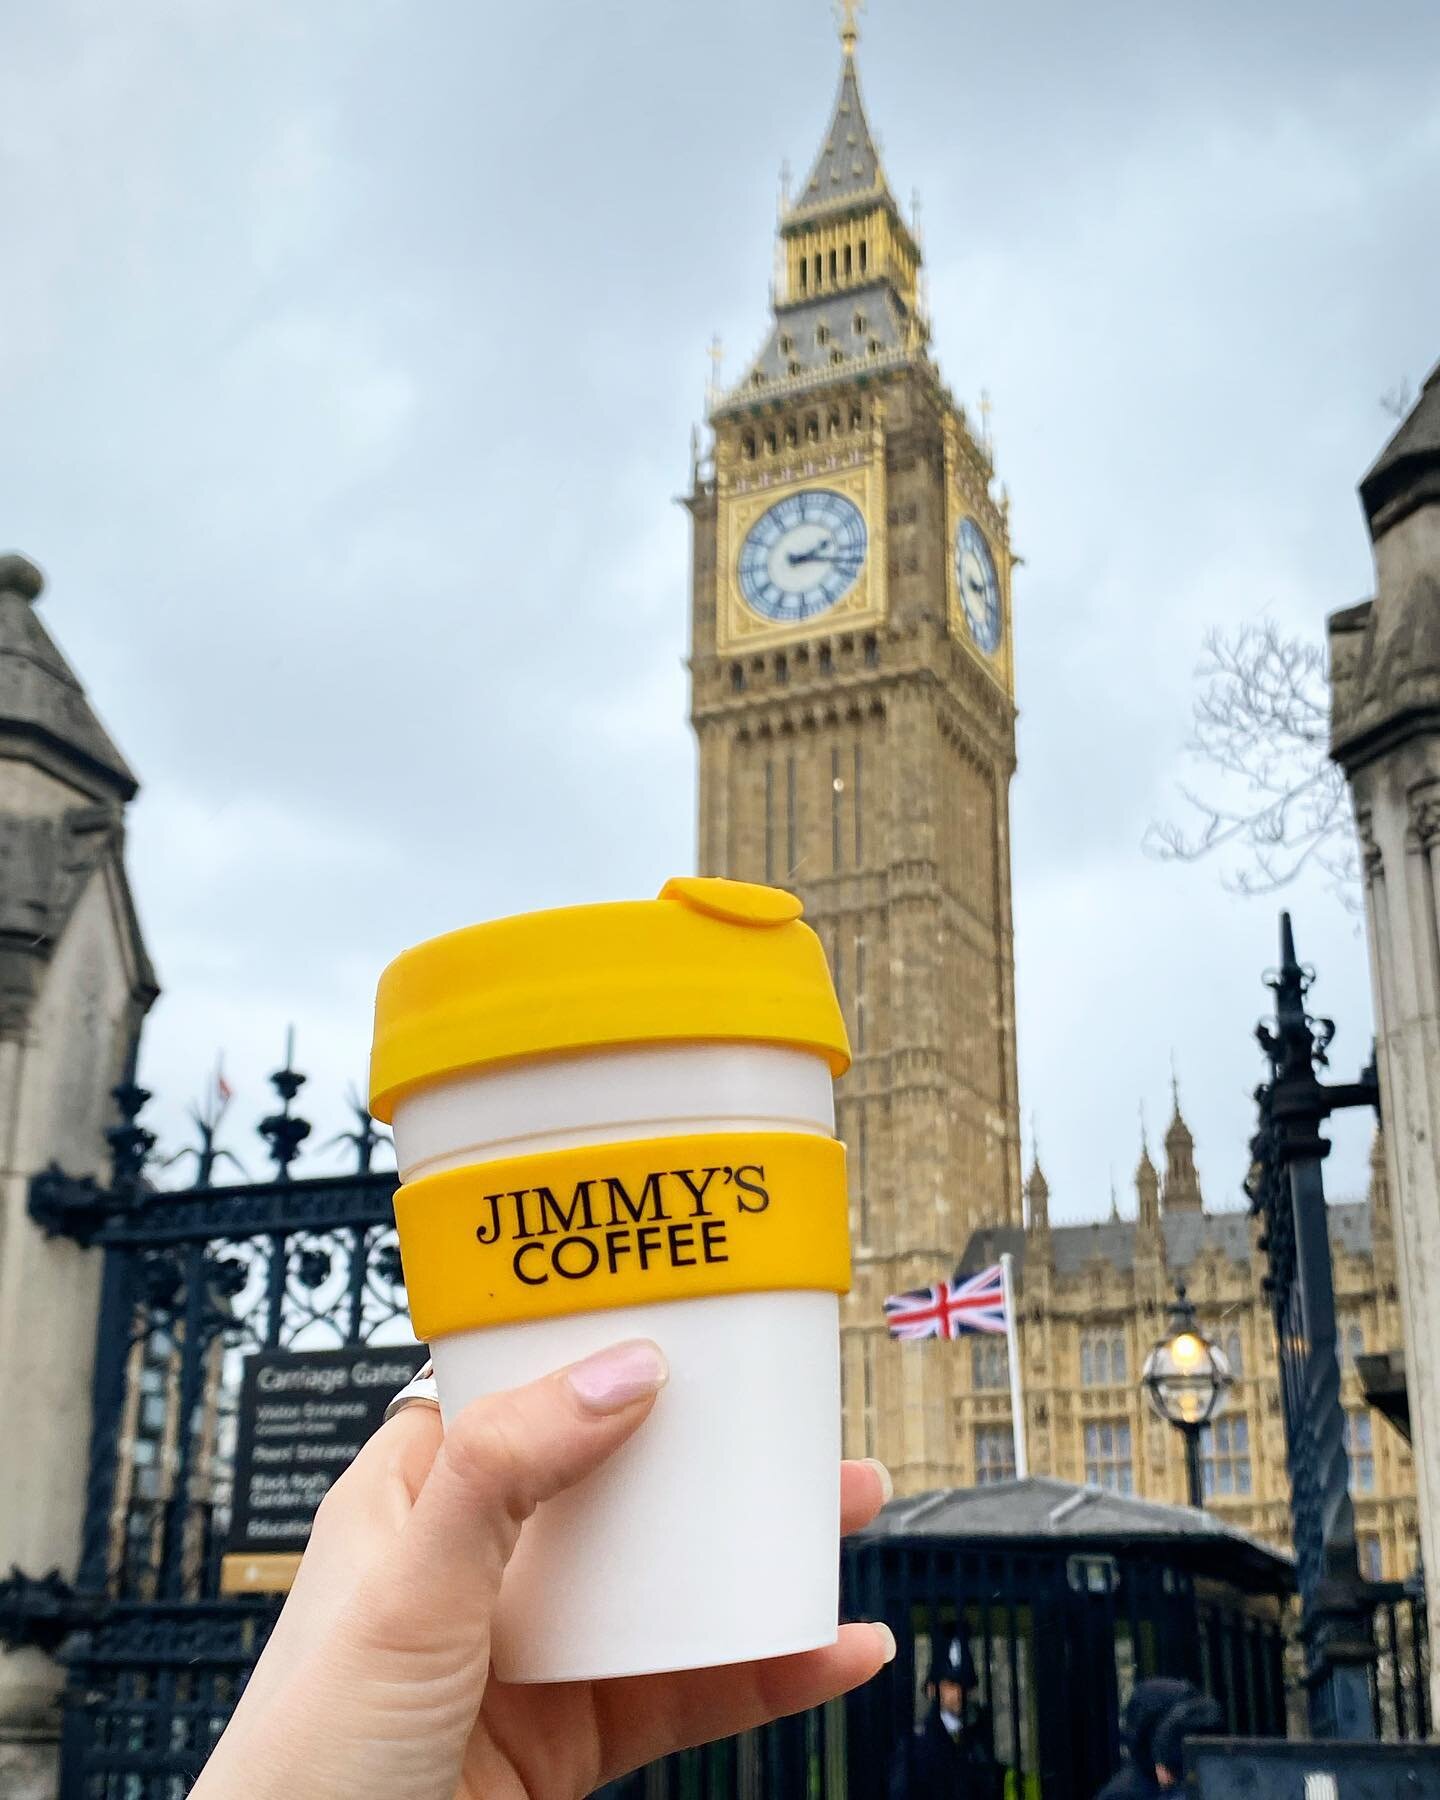 Do you take your Jimmy&rsquo;s with you everywhere you go? 

🏴󠁧󠁢󠁥󠁮󠁧󠁿✈️☕️💛

Send us photos of where you take your Jimmy&rsquo;s traveller! 
#jimmysaroundtheworld #aroundtheworld #traveller #keepcup #thermos #coffeetogo #coffee #bigben #london 